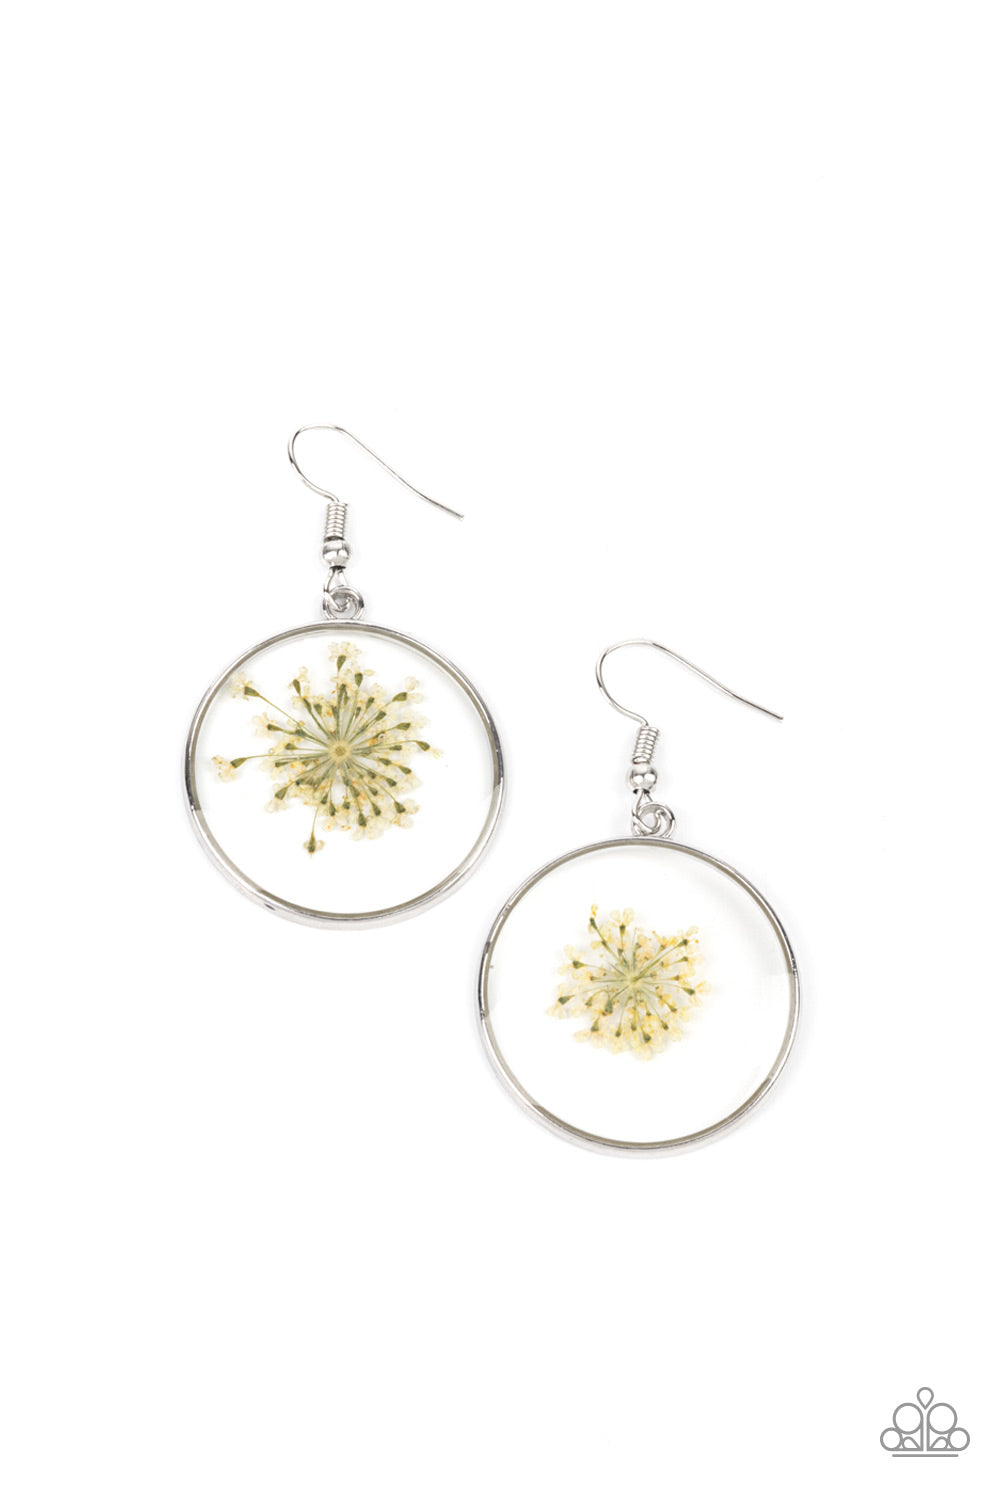 Happily Ever Eden - Paparazzi - White Flower Acrylic Circle Earrings